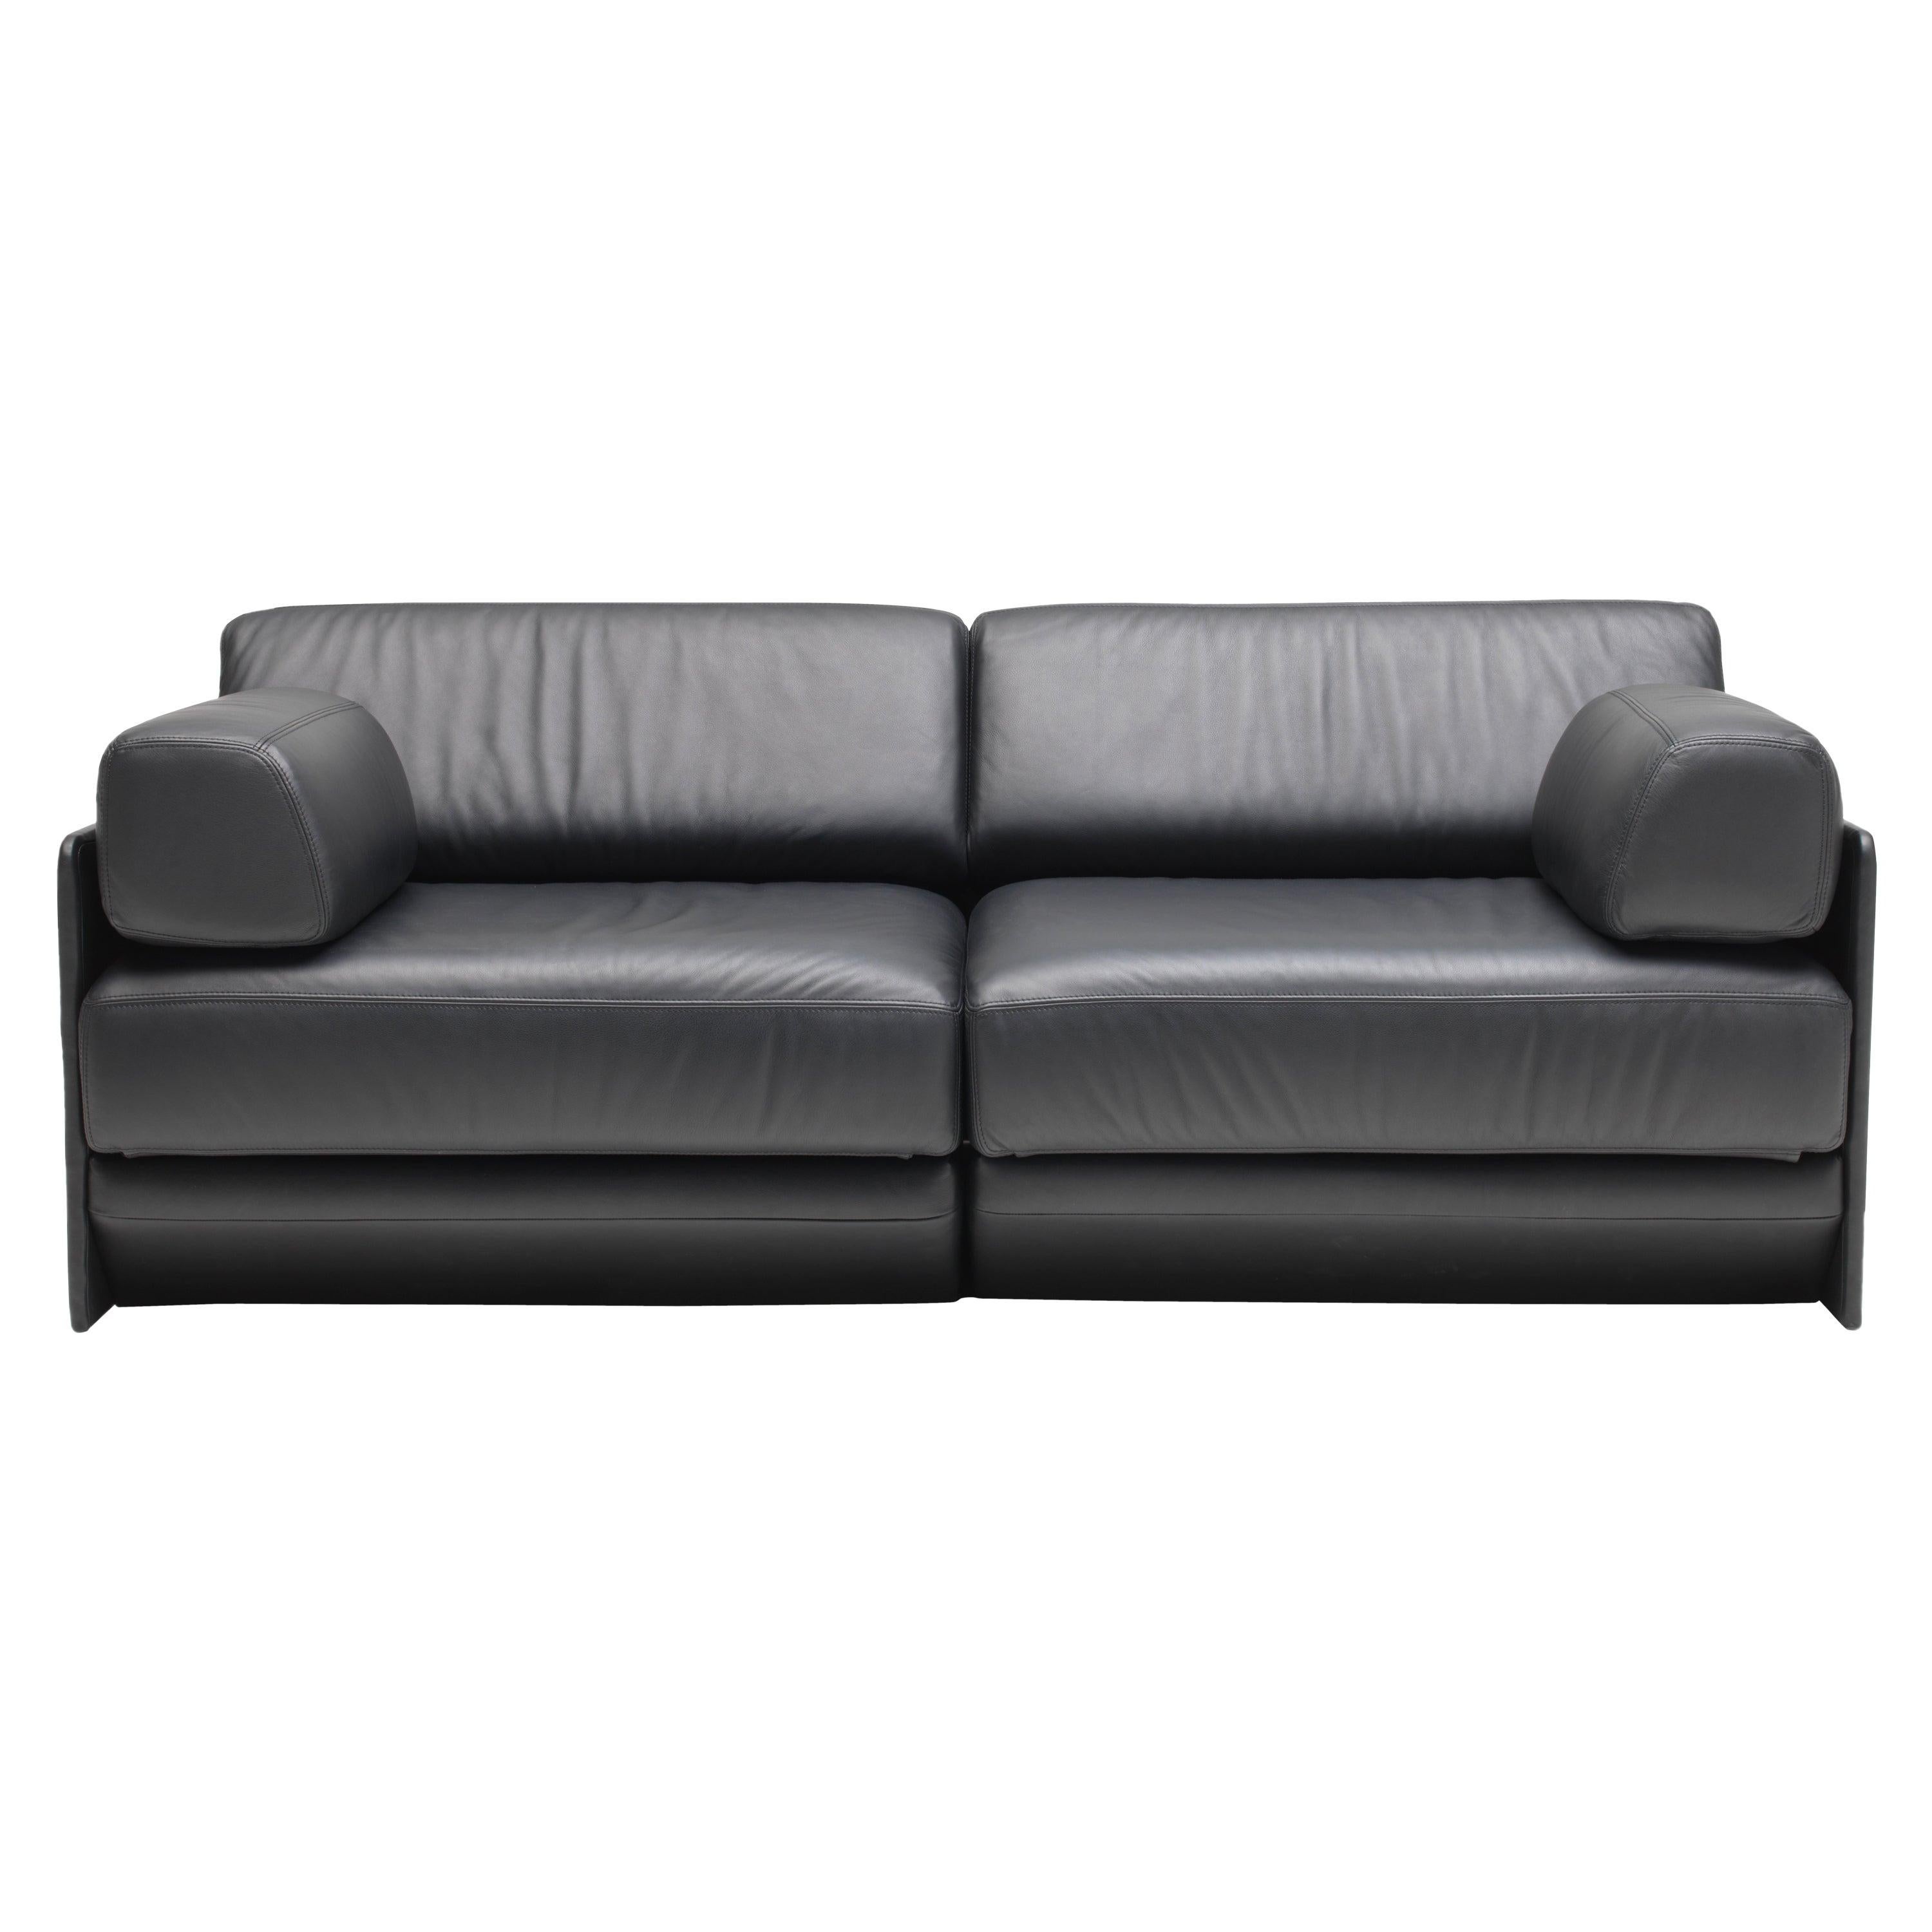 For Sale:  (Black) DS-76 Convertible Leather Modern Sofa or Daybed by De Sede